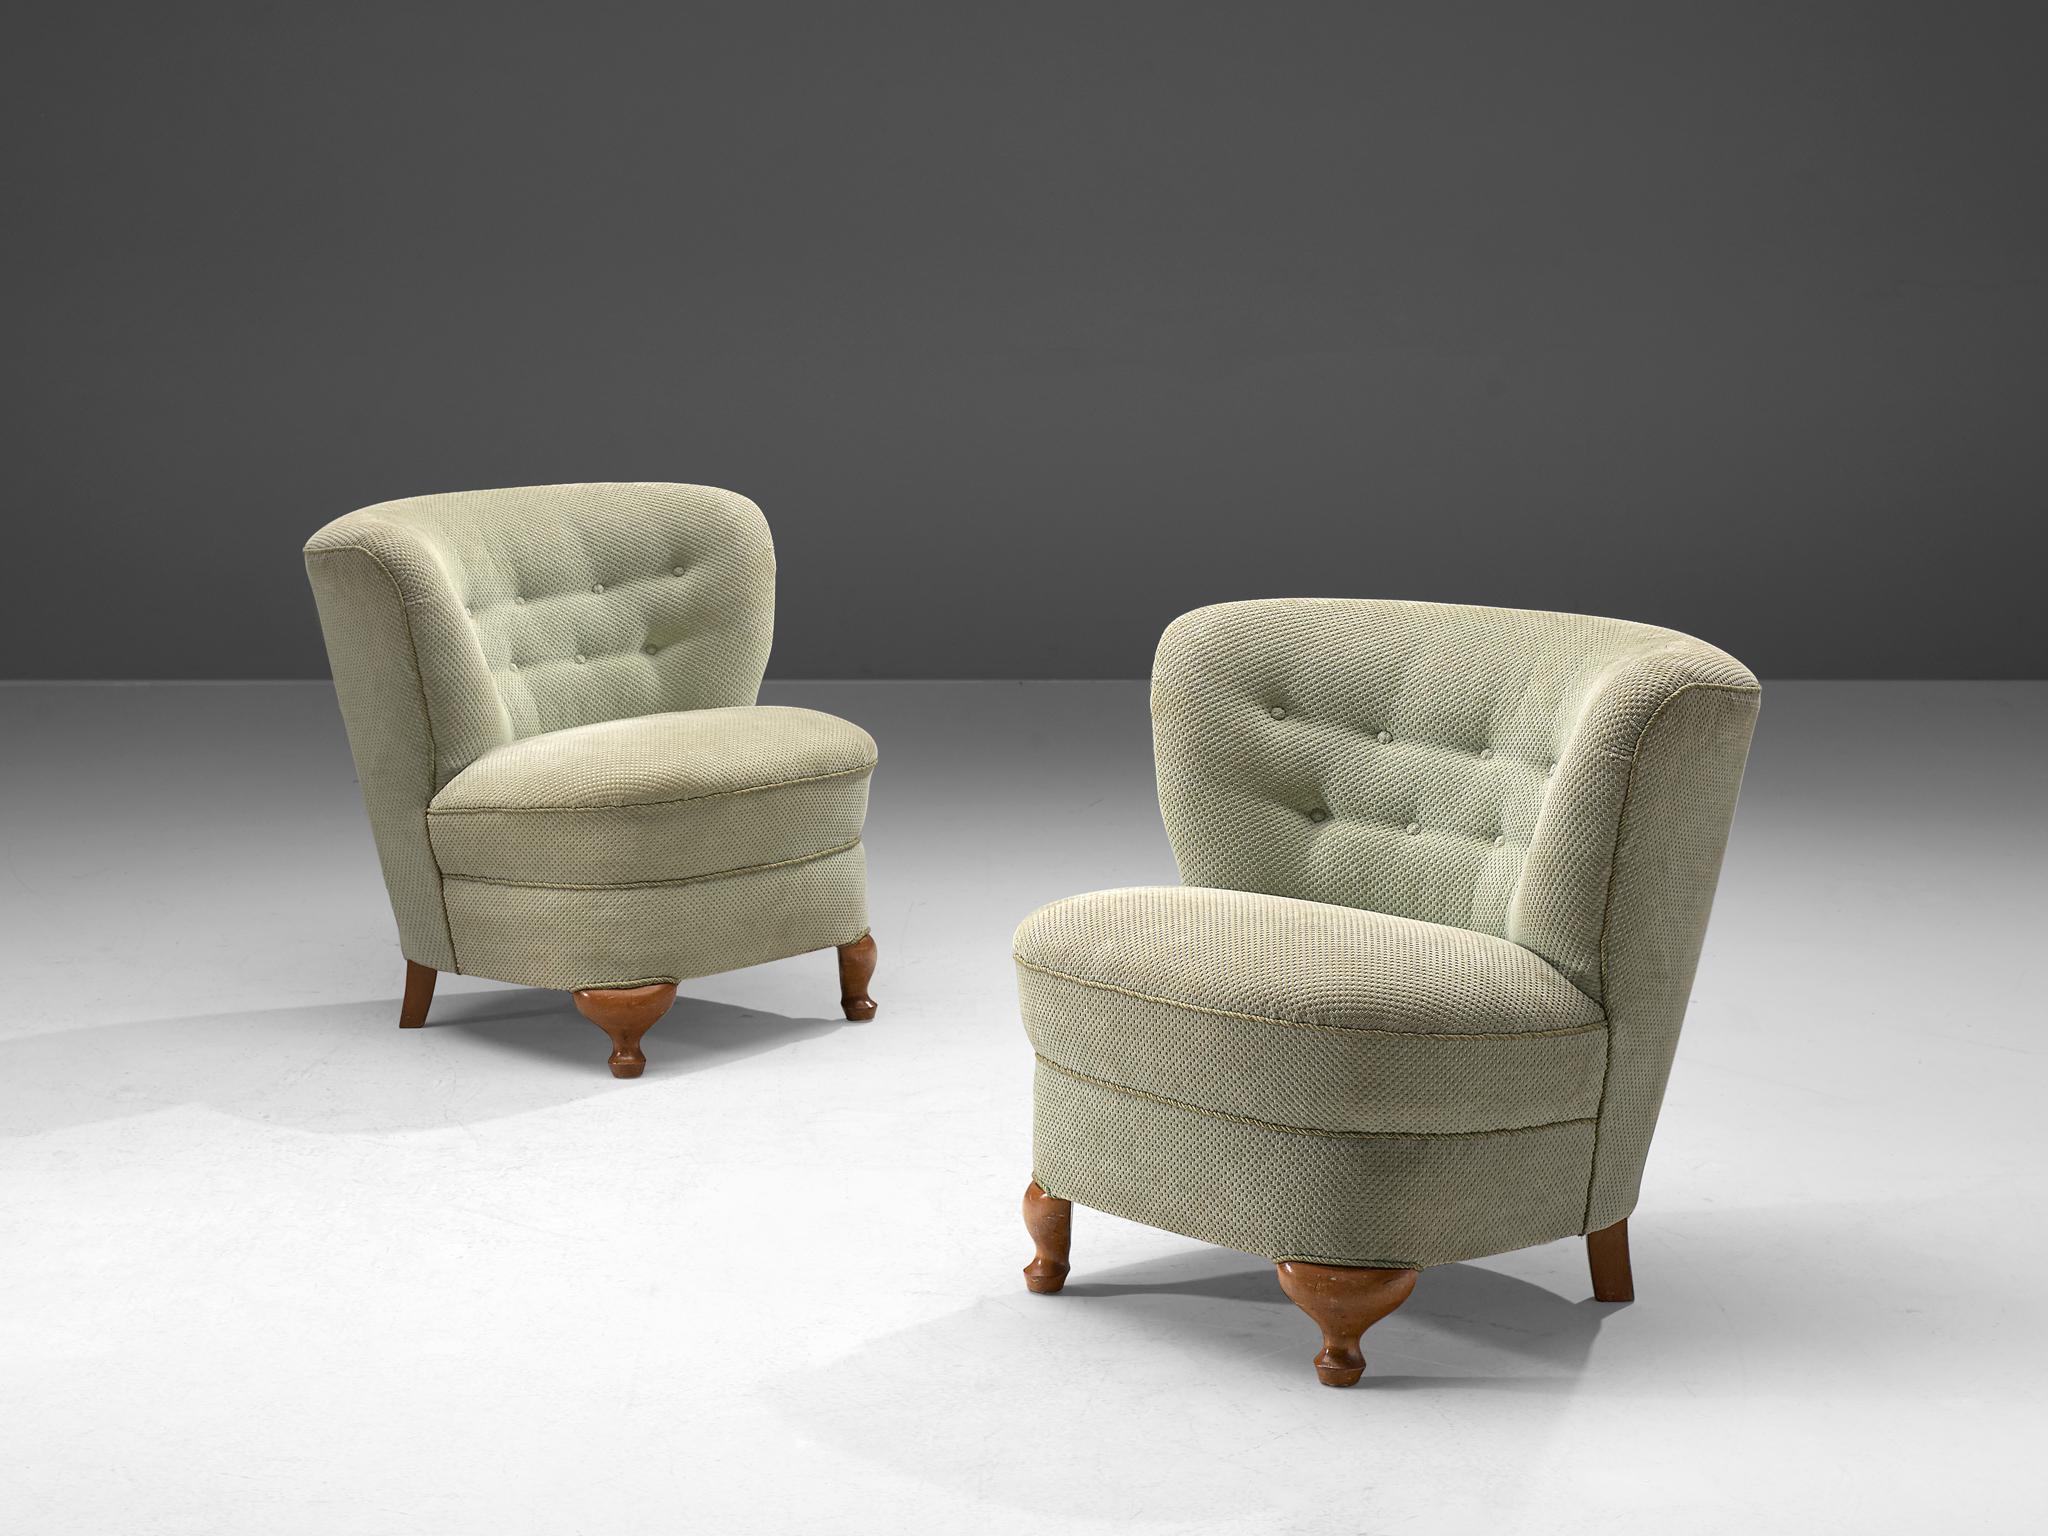 Living room set, fabric and wood, France, 1960s

This elegant lounge set, consisting of two easy chairs and one sofa, is bold and round. The backrests flow slightly outwards when seen from the seat which is the reason that this chair has a very